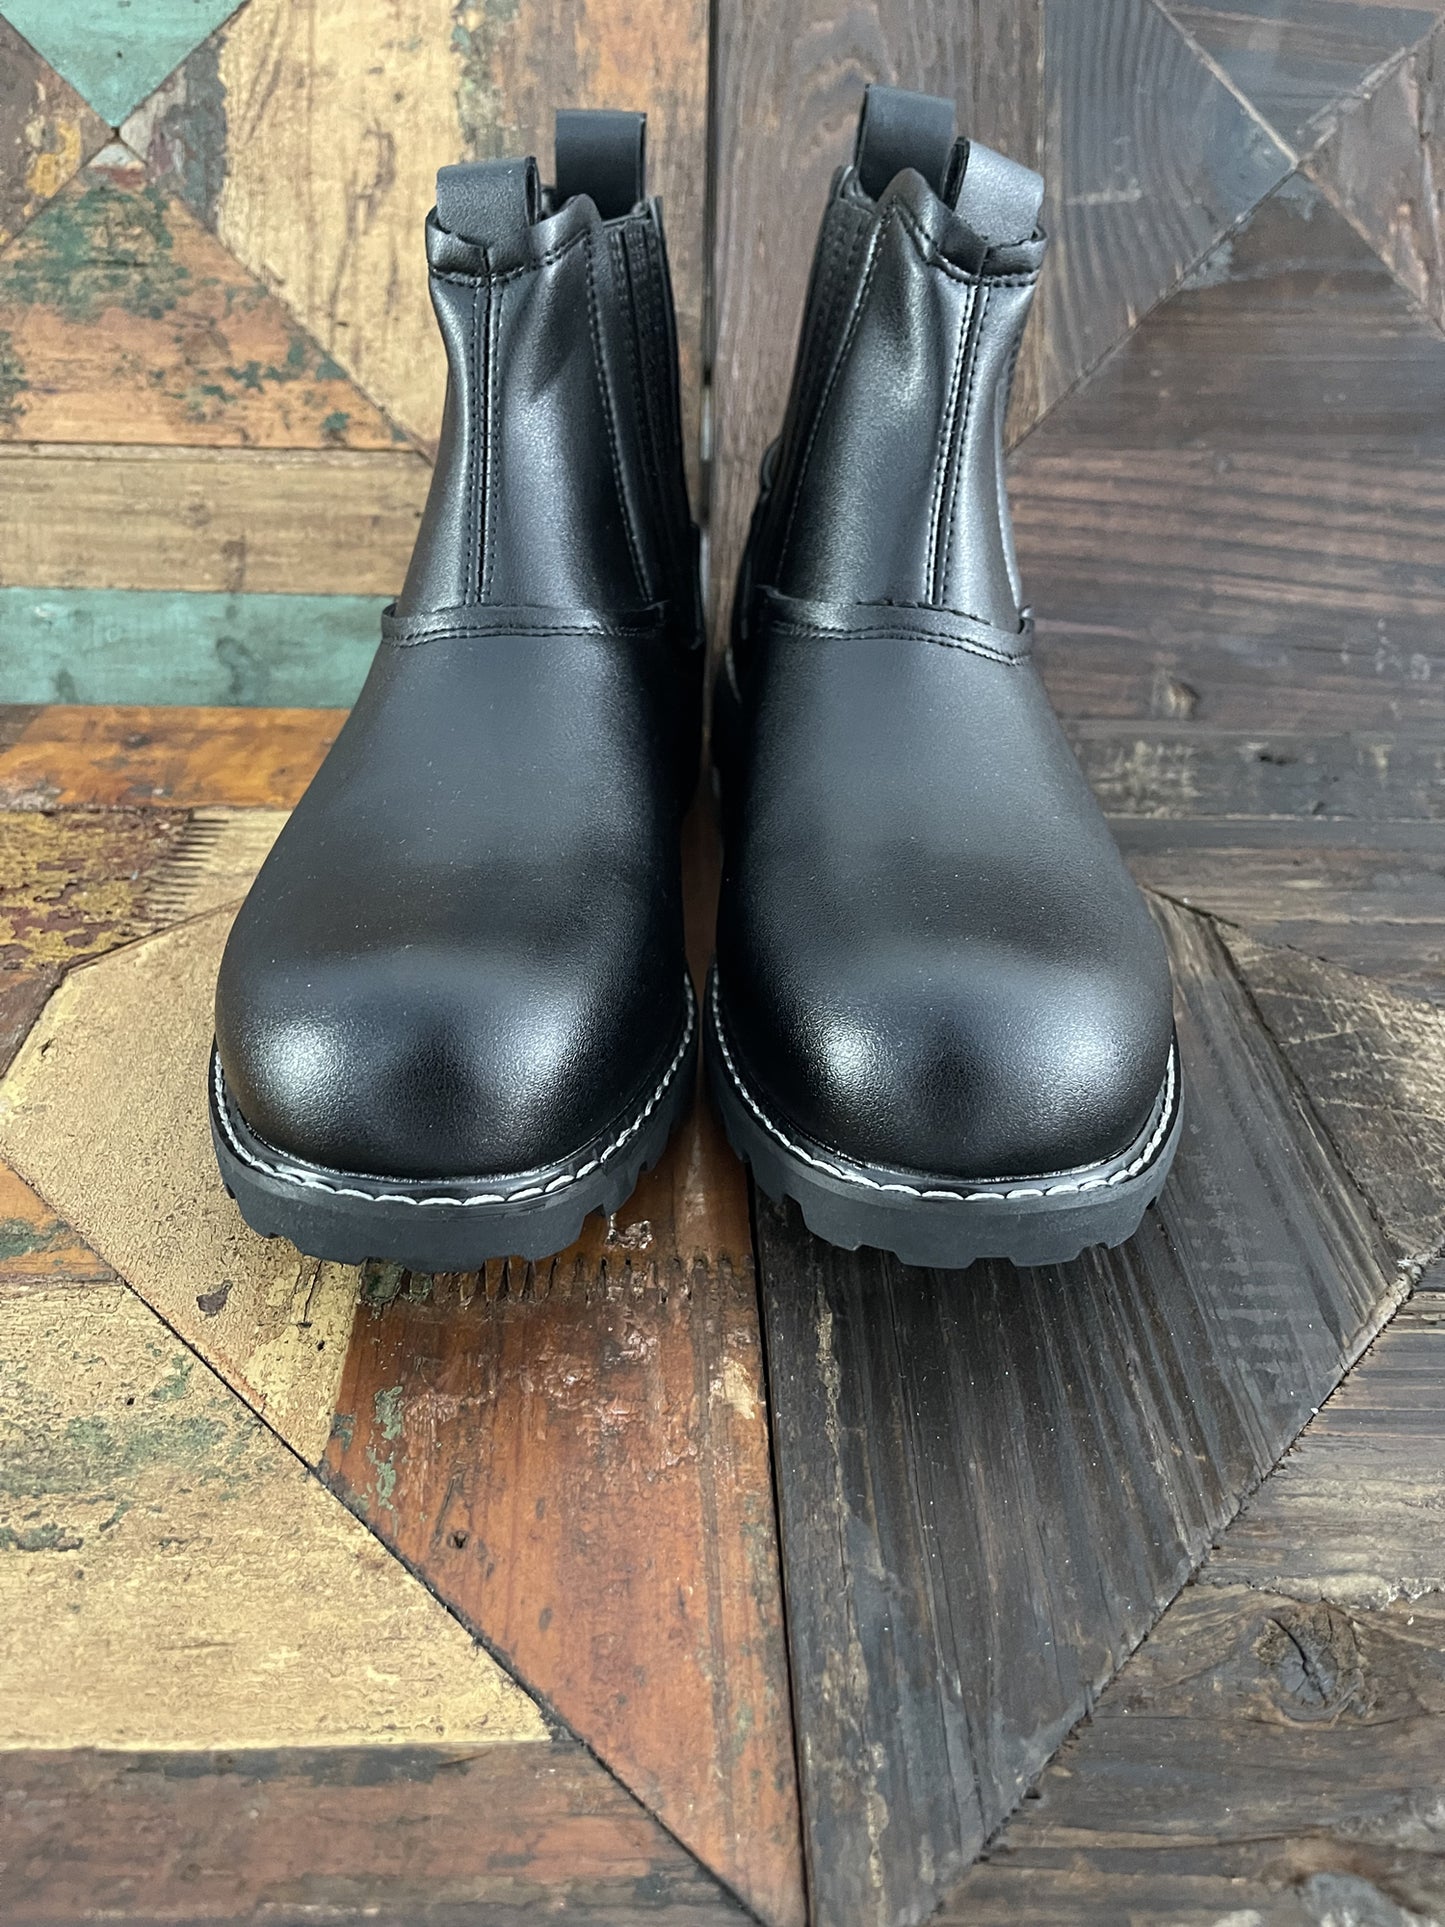 High Quality Men Chelsea Boots Handmade Shoes Vintage Leather